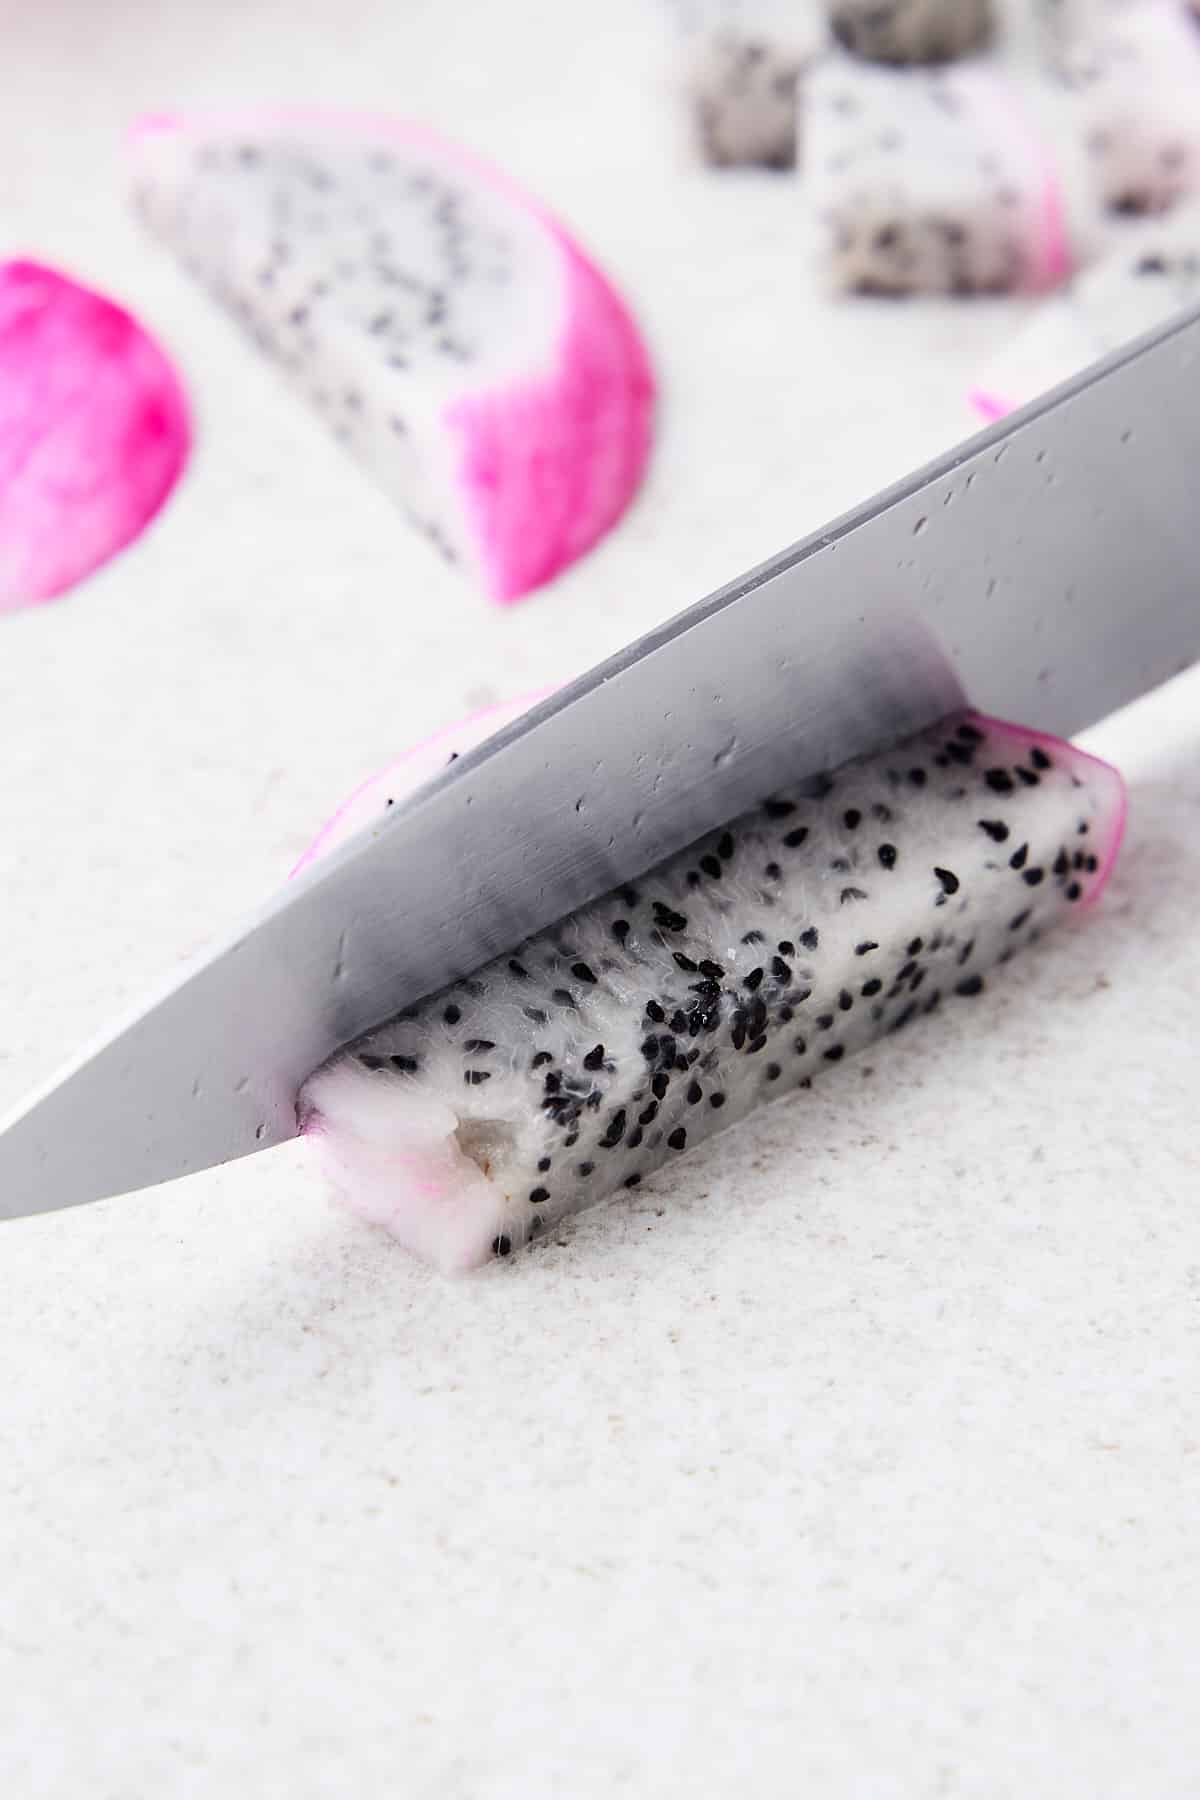 Knife cutting a piece of dragonfruit